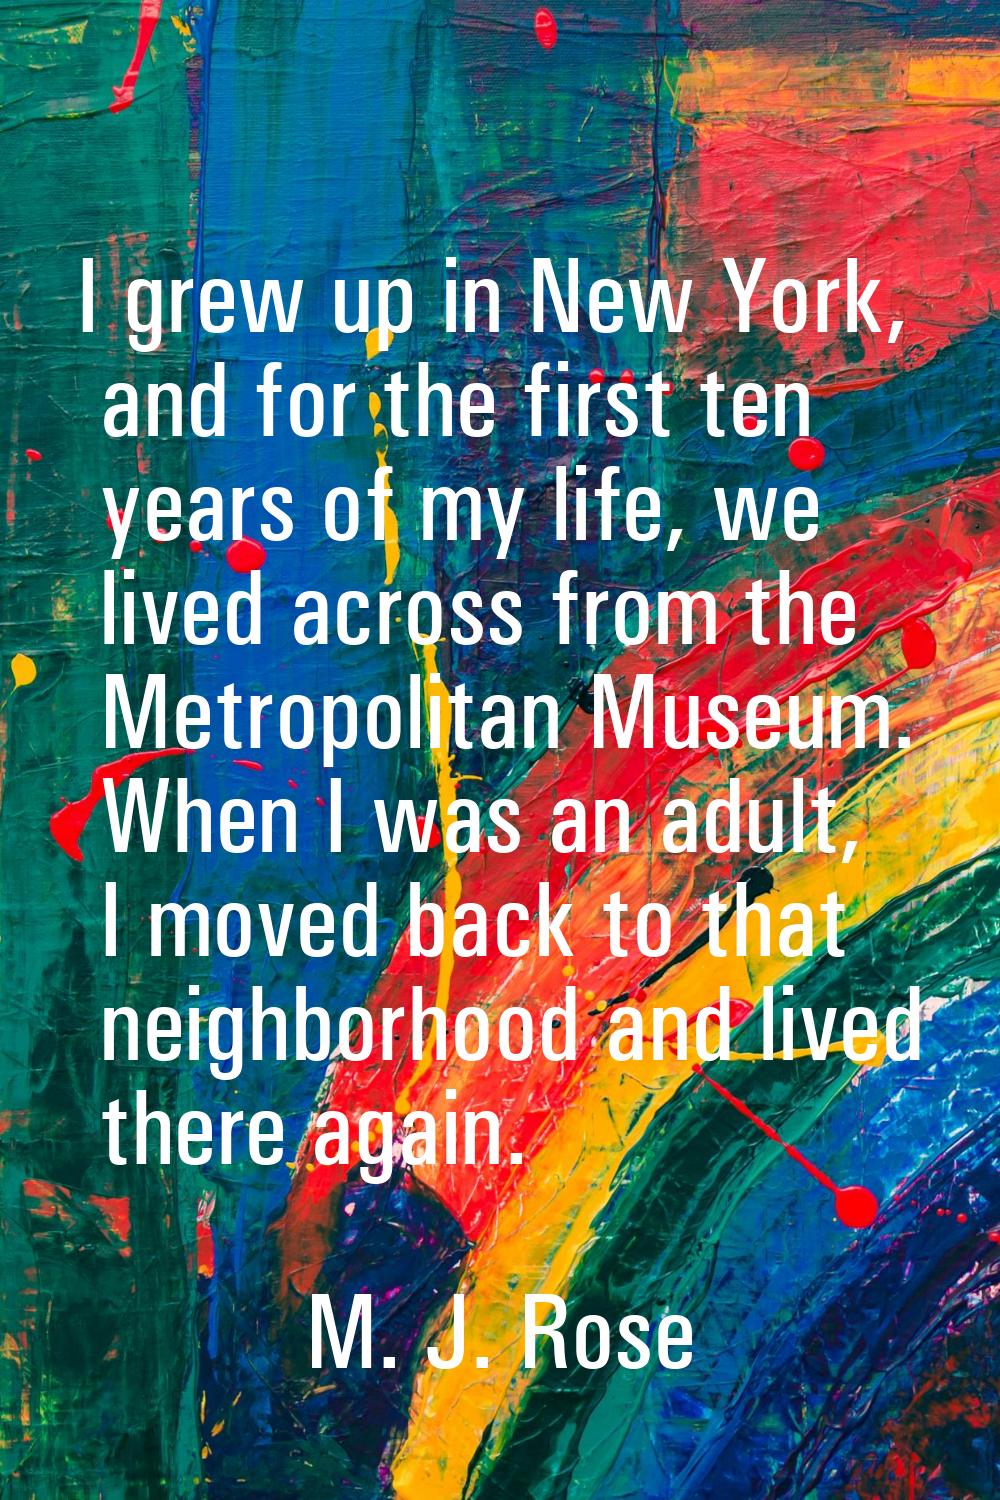 I grew up in New York, and for the first ten years of my life, we lived across from the Metropolita